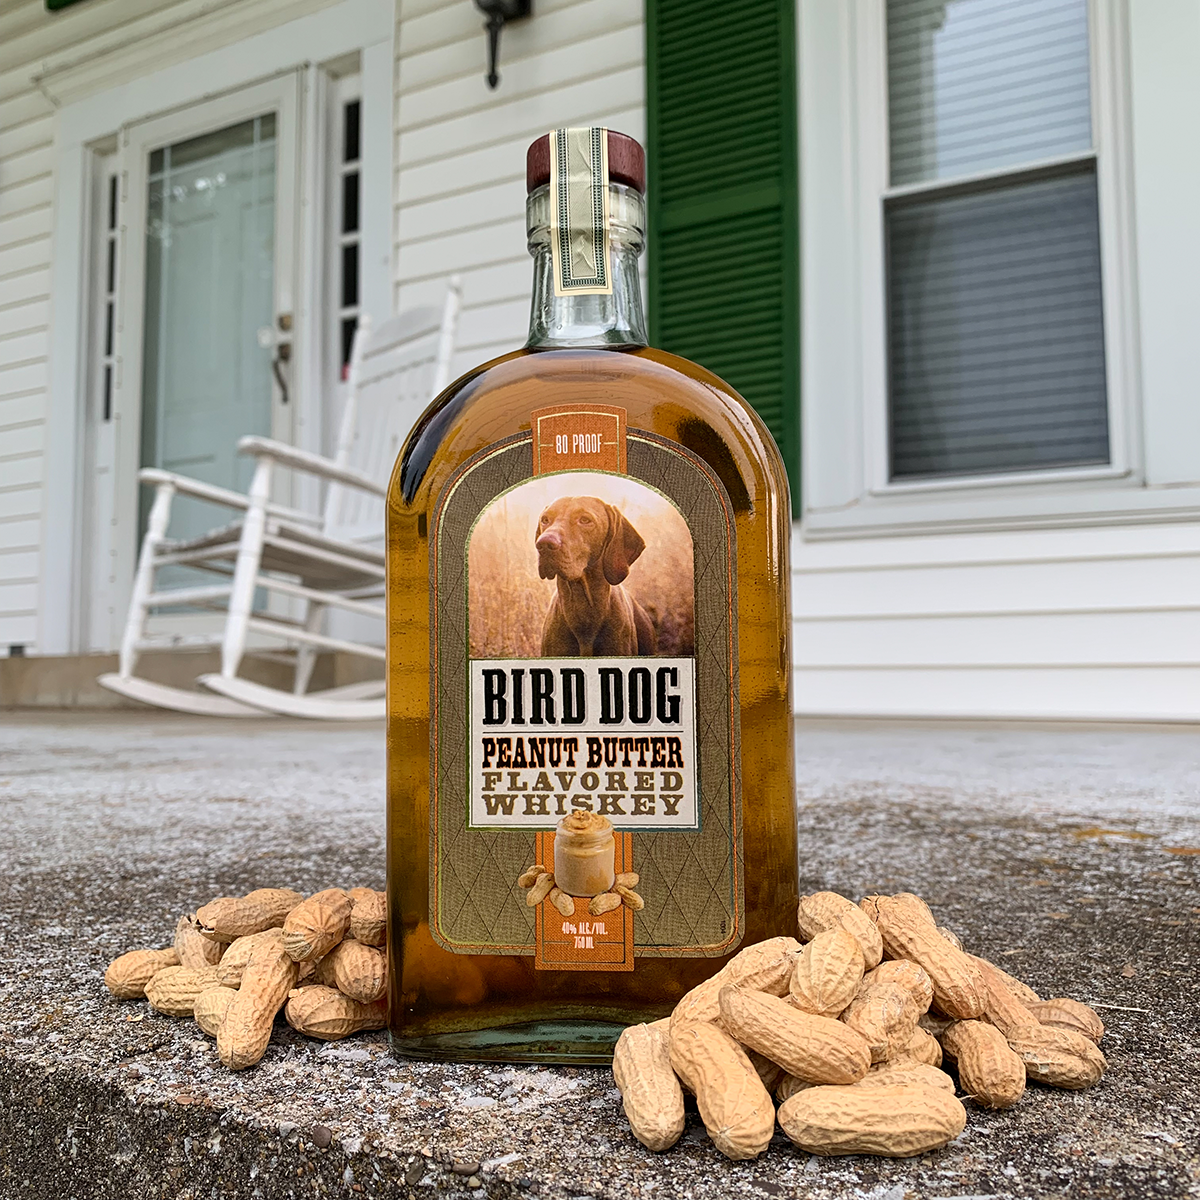 Bird Dog Peanut Butter Flavored Whiskey on a porch next to some peanuts